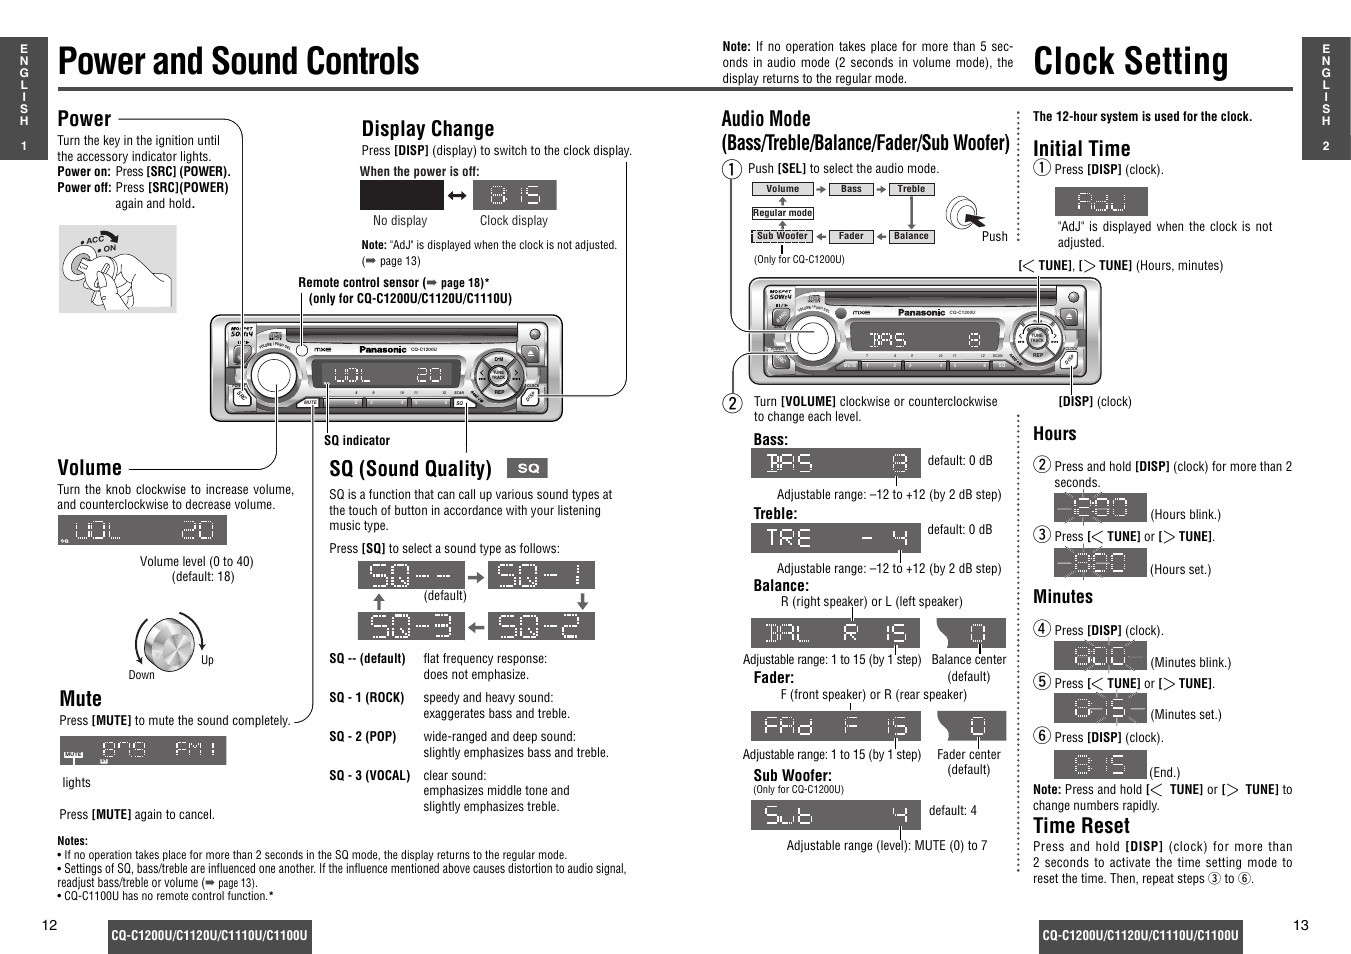 Power and sound controls, Clock setting, Audio mode (bass/treble/balance/fader/sub woofer) | Initial time, Time reset, Mute, Volume, Sq (sound quality), Power, Display change | Panasonic CQ-C1200U Manuel d'utilisation | Page 7 / 17